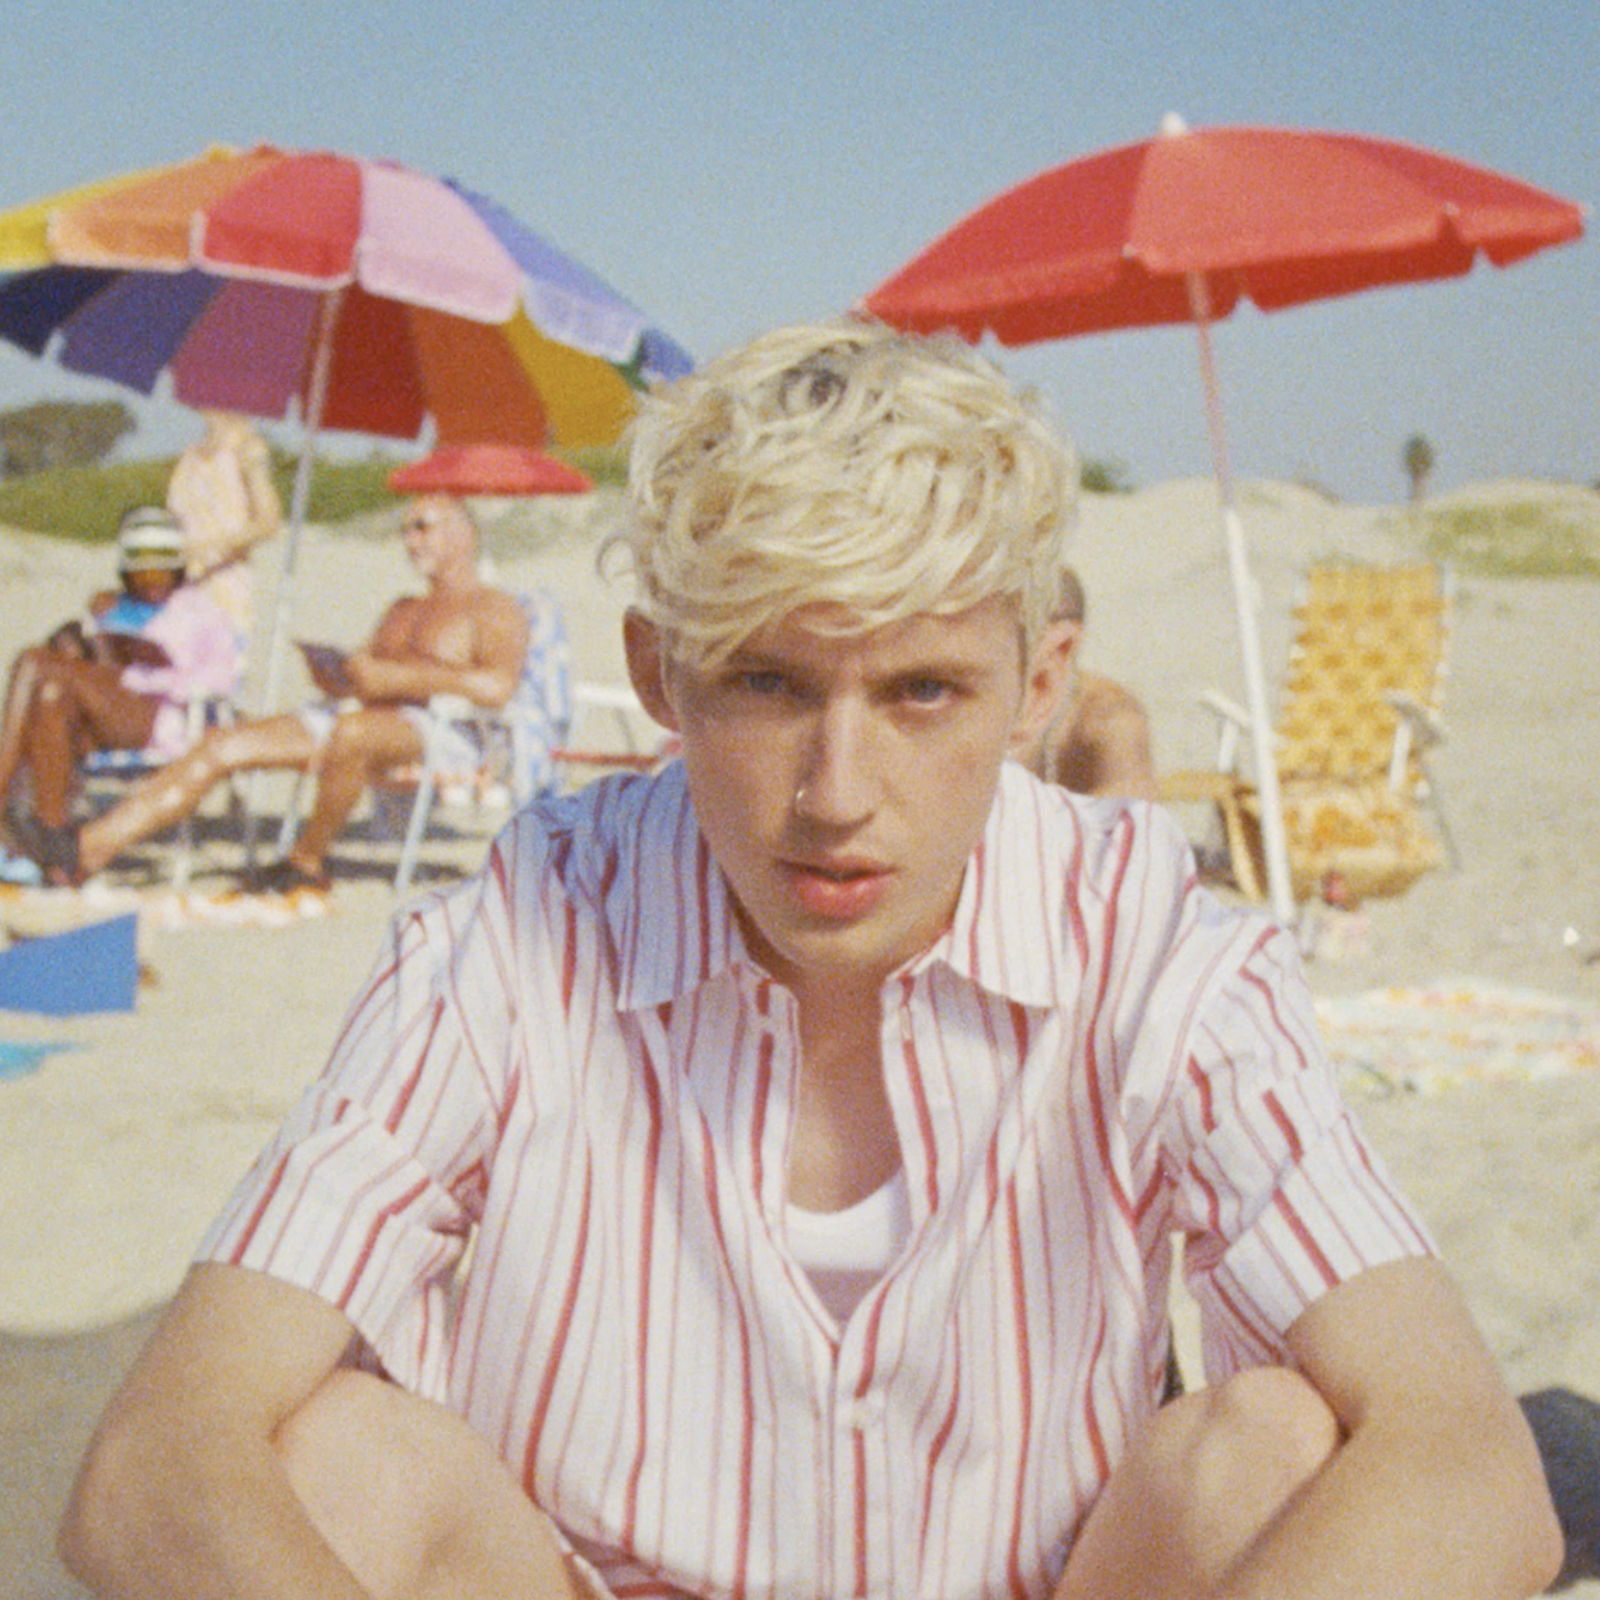 Screenshot of Troye Sivan from the Lucky Strike video